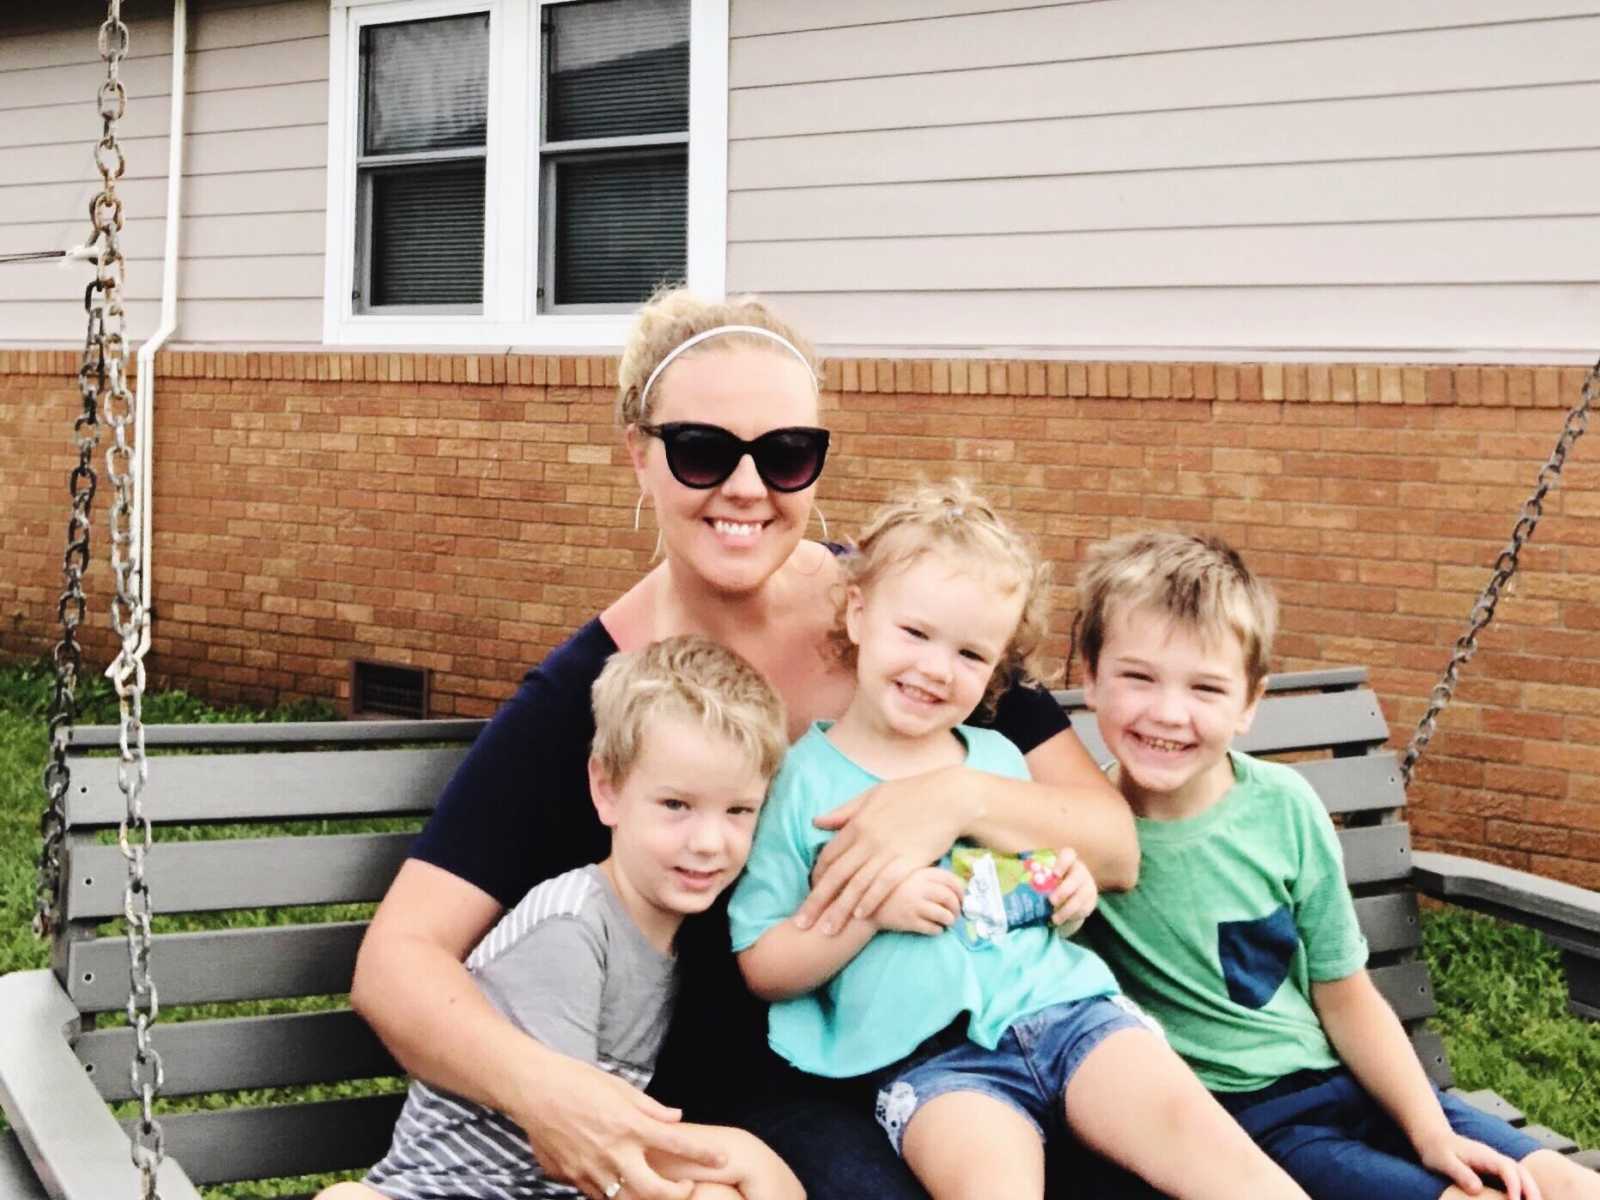 Mother who escaped abusive husband sits on outdoor swing with three young children